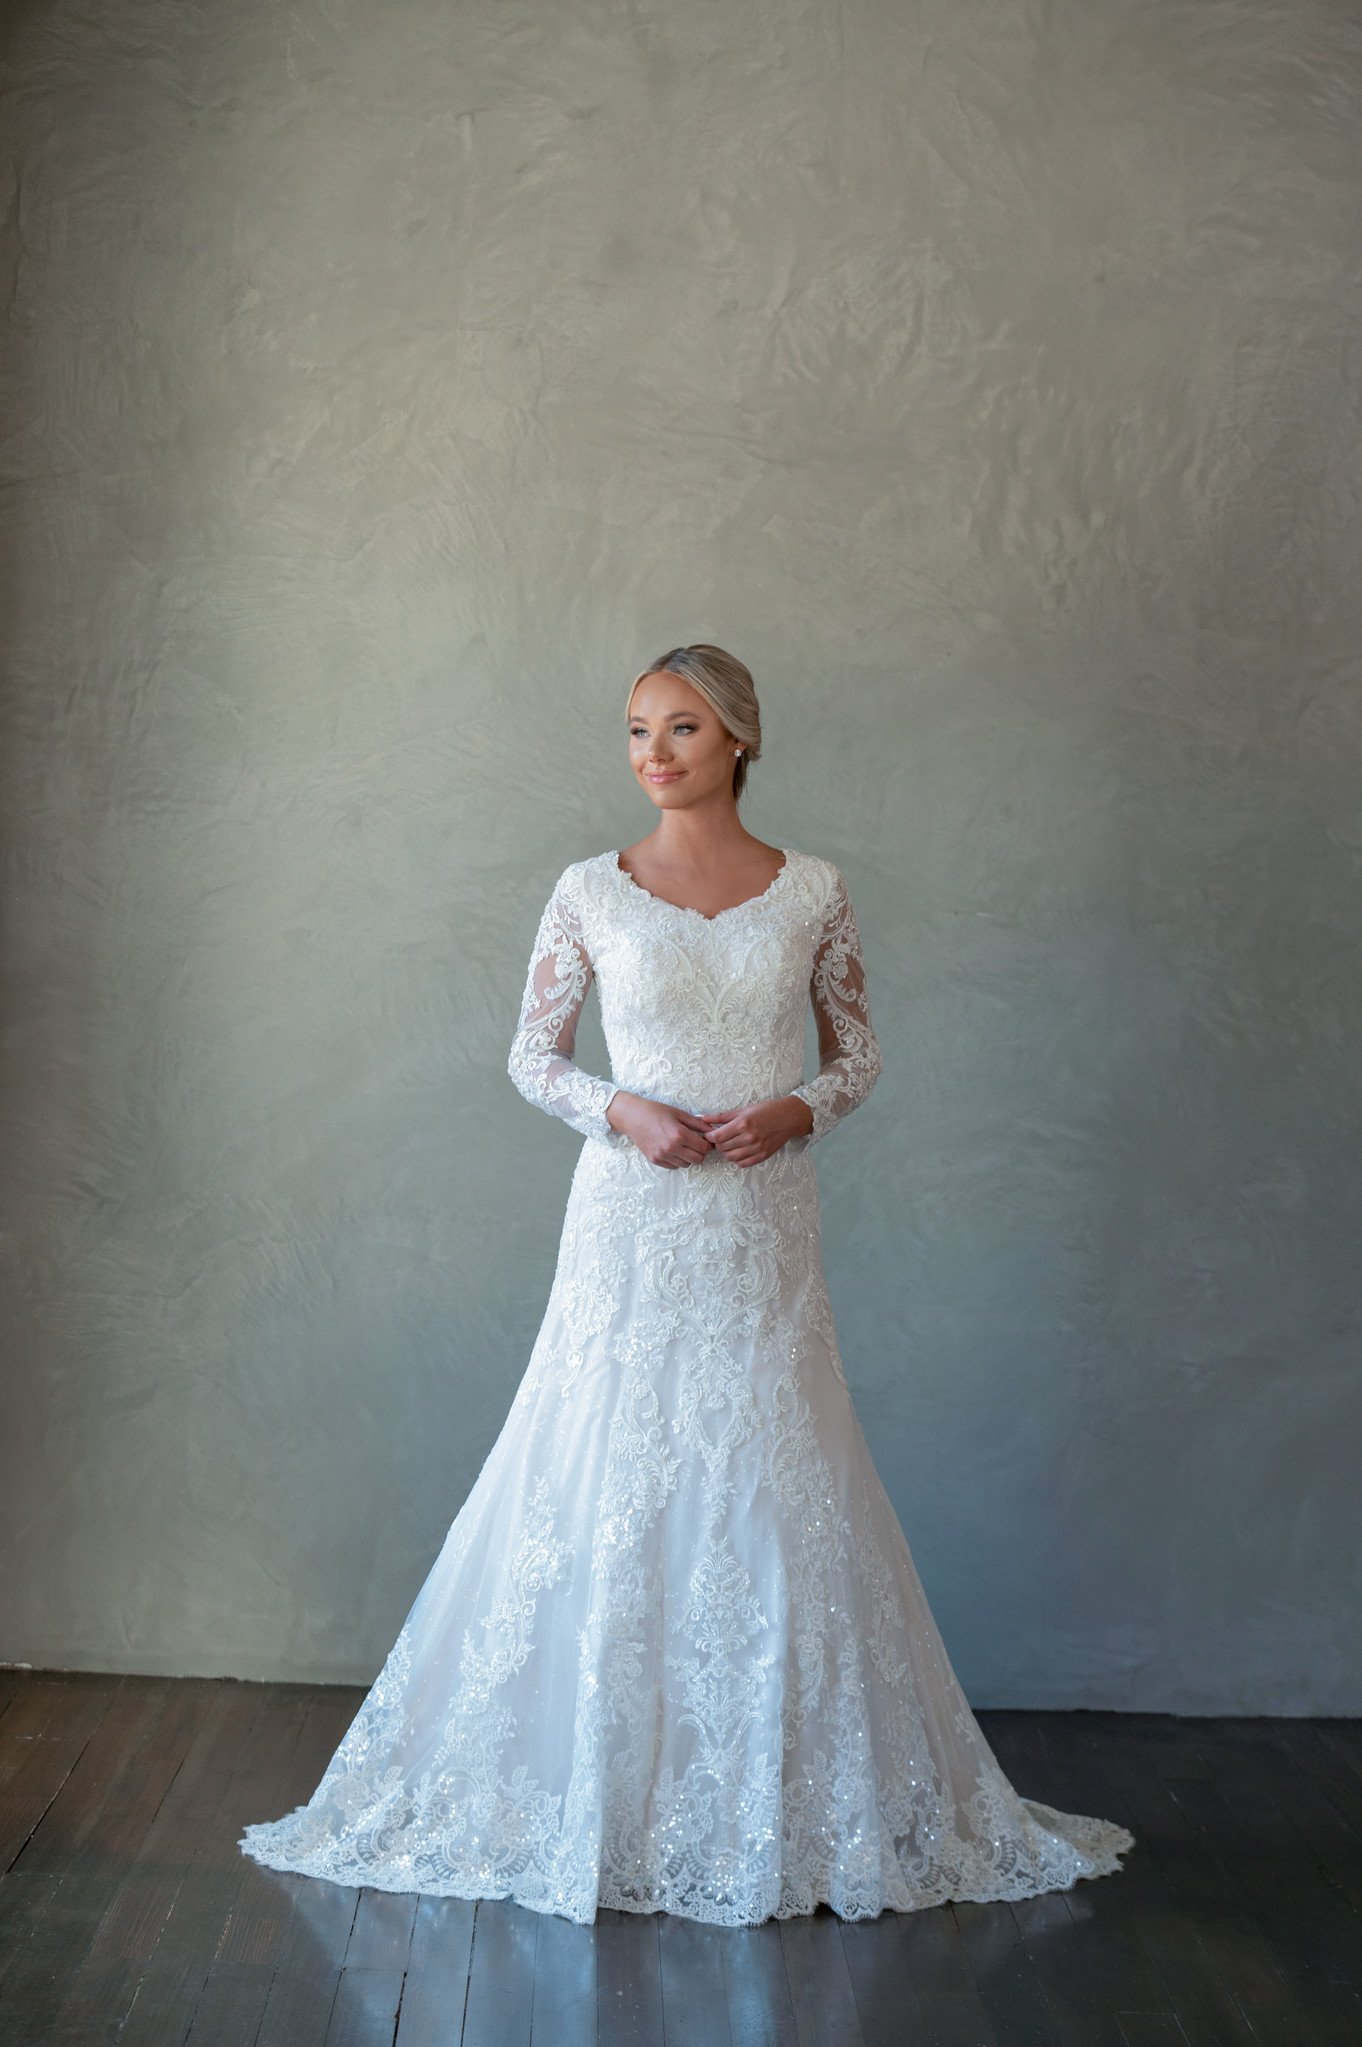 High Neck Wedding Dress With Long Sleeves. Lace Turtleneck Bridal Gown, High  Collar Wedding Gown Harper -  Canada